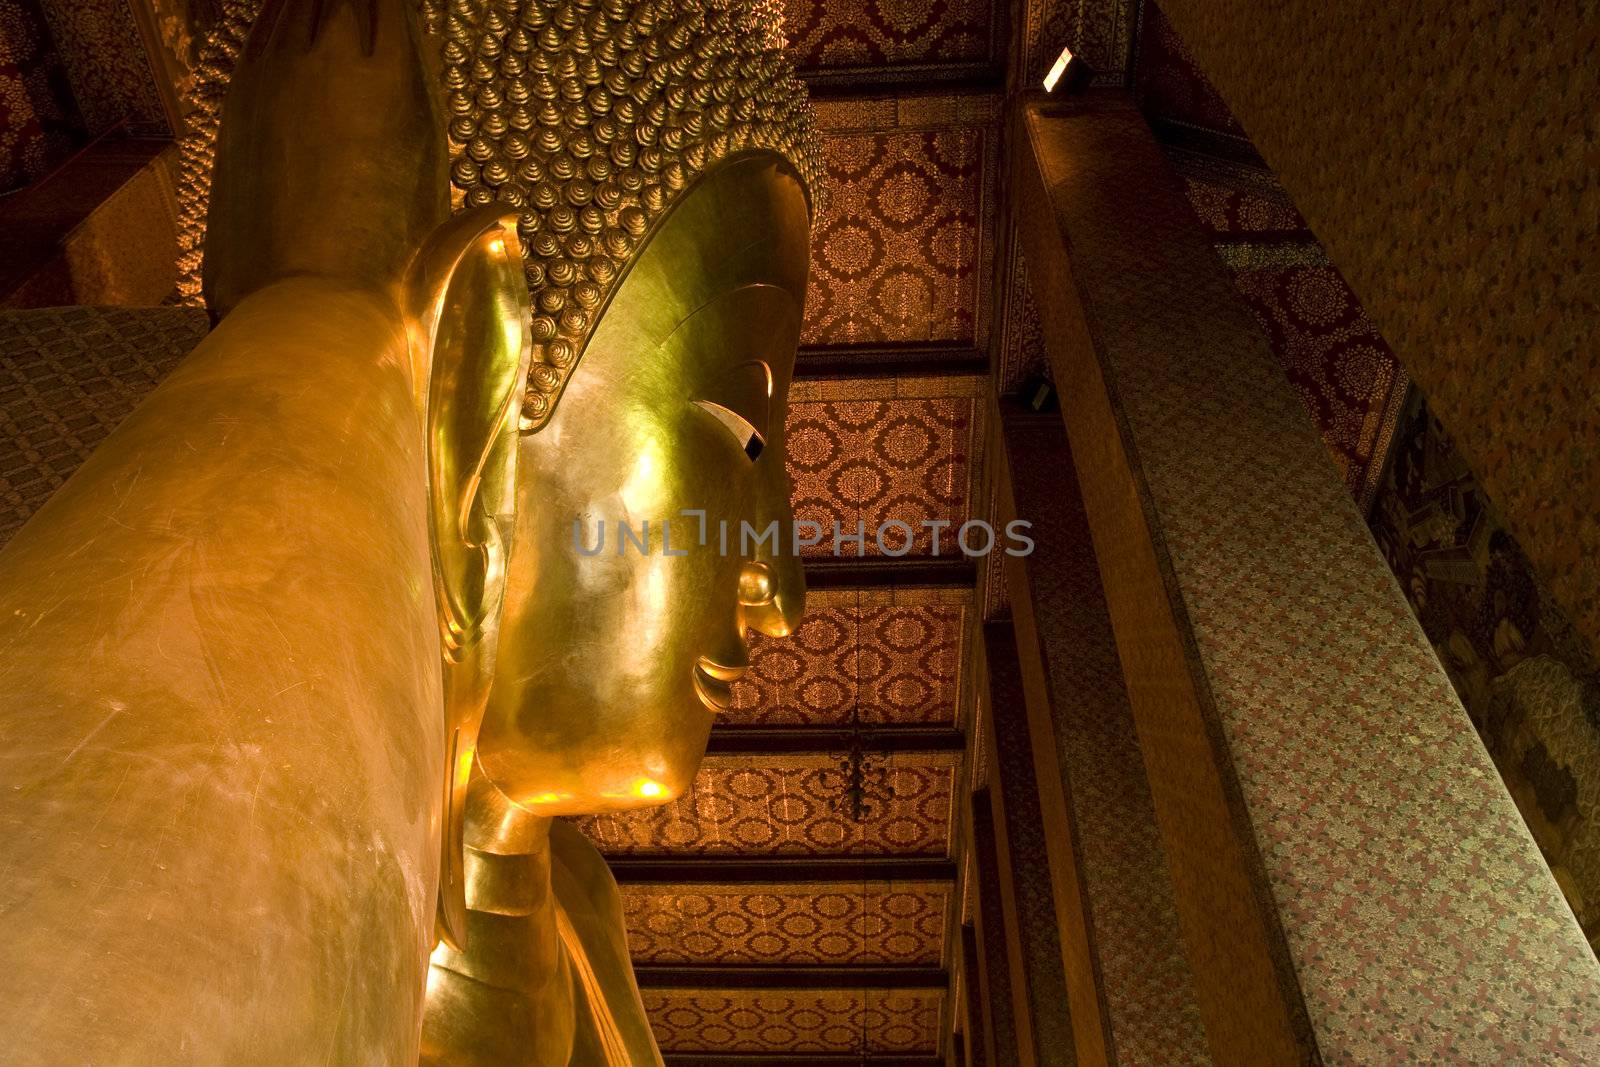 Golden Statue of Reclining Buddha by foto76